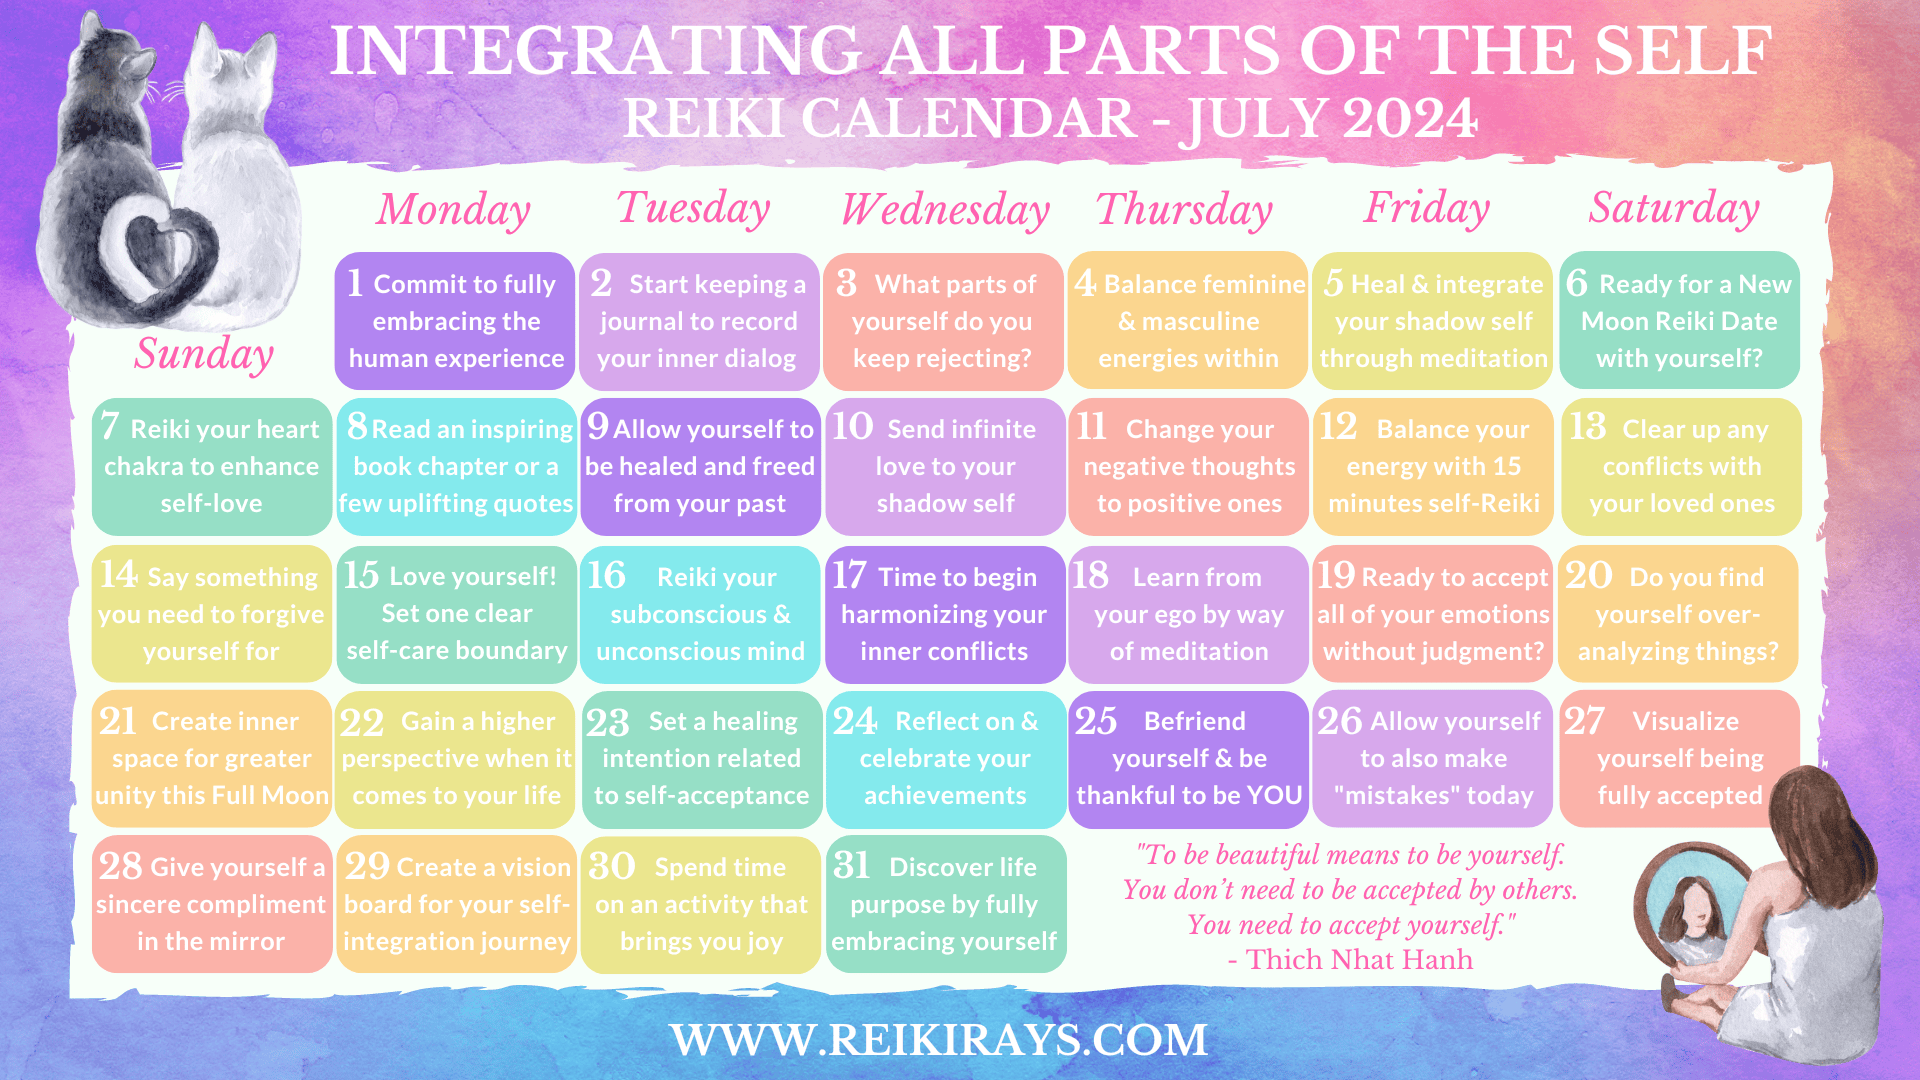 Integrating All Parts of The Self - Reiki Calendar July 2024